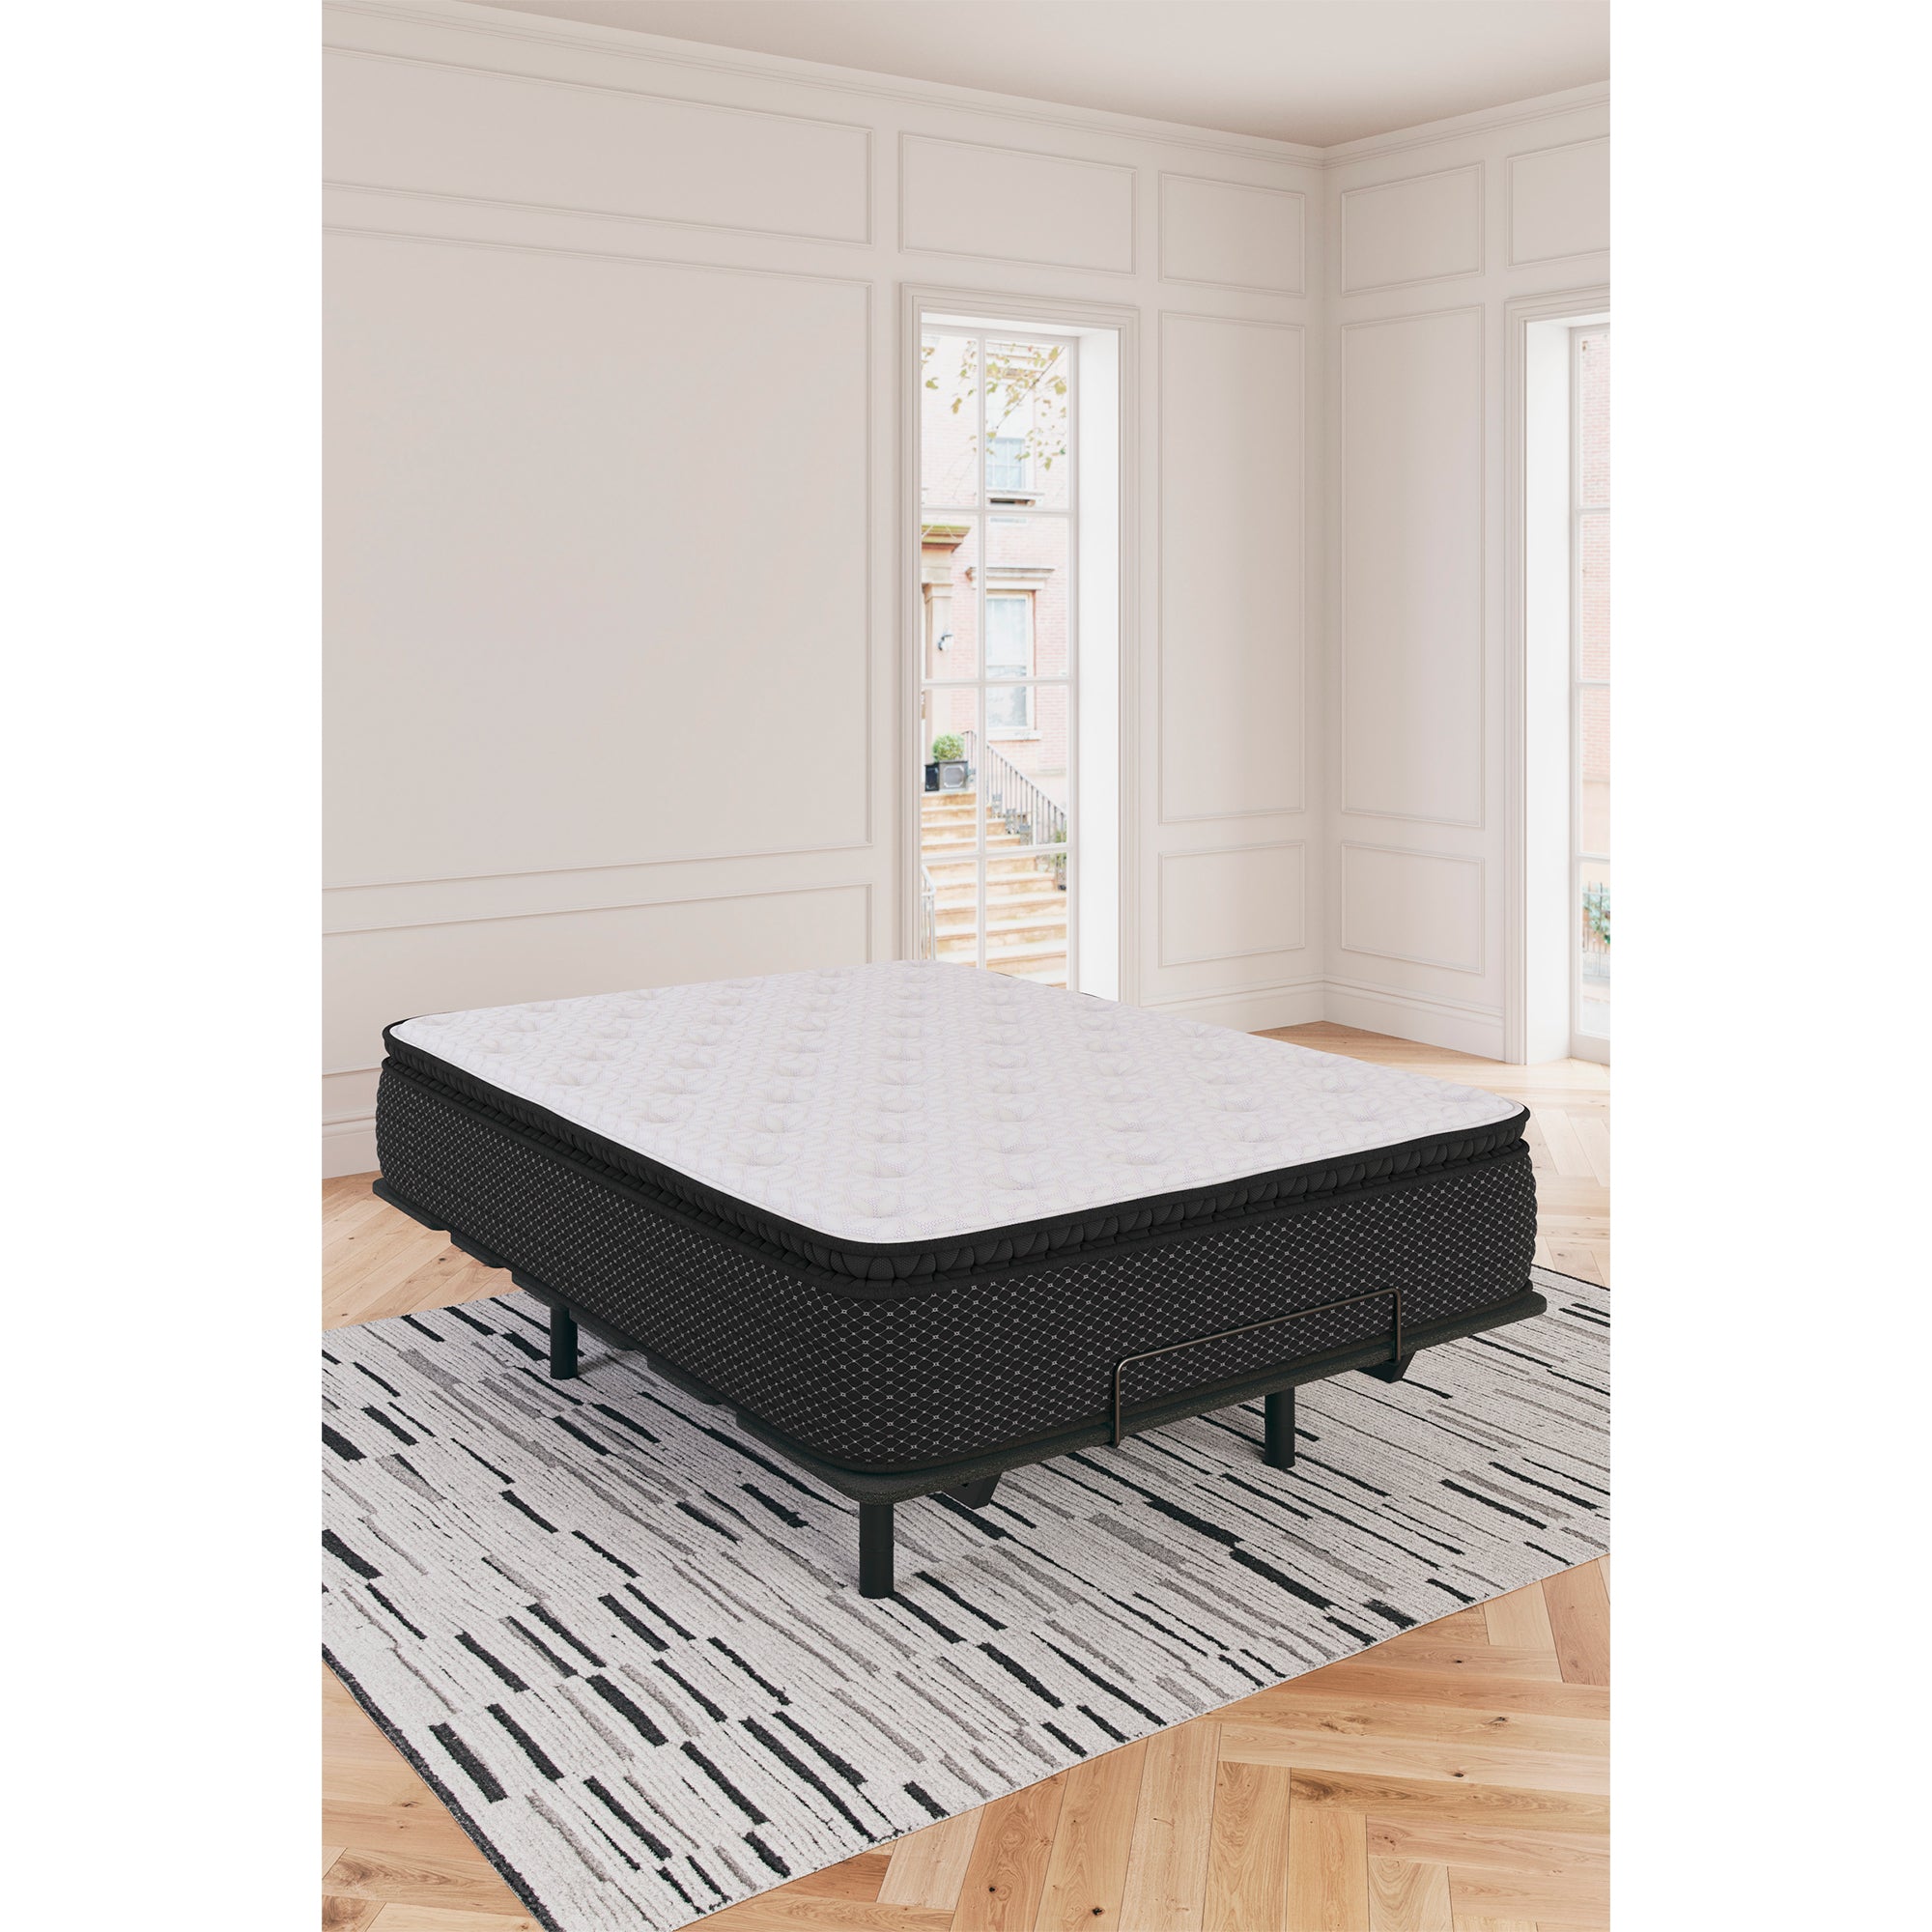 13 Inch Limited Edition Pillowtop King Mattress